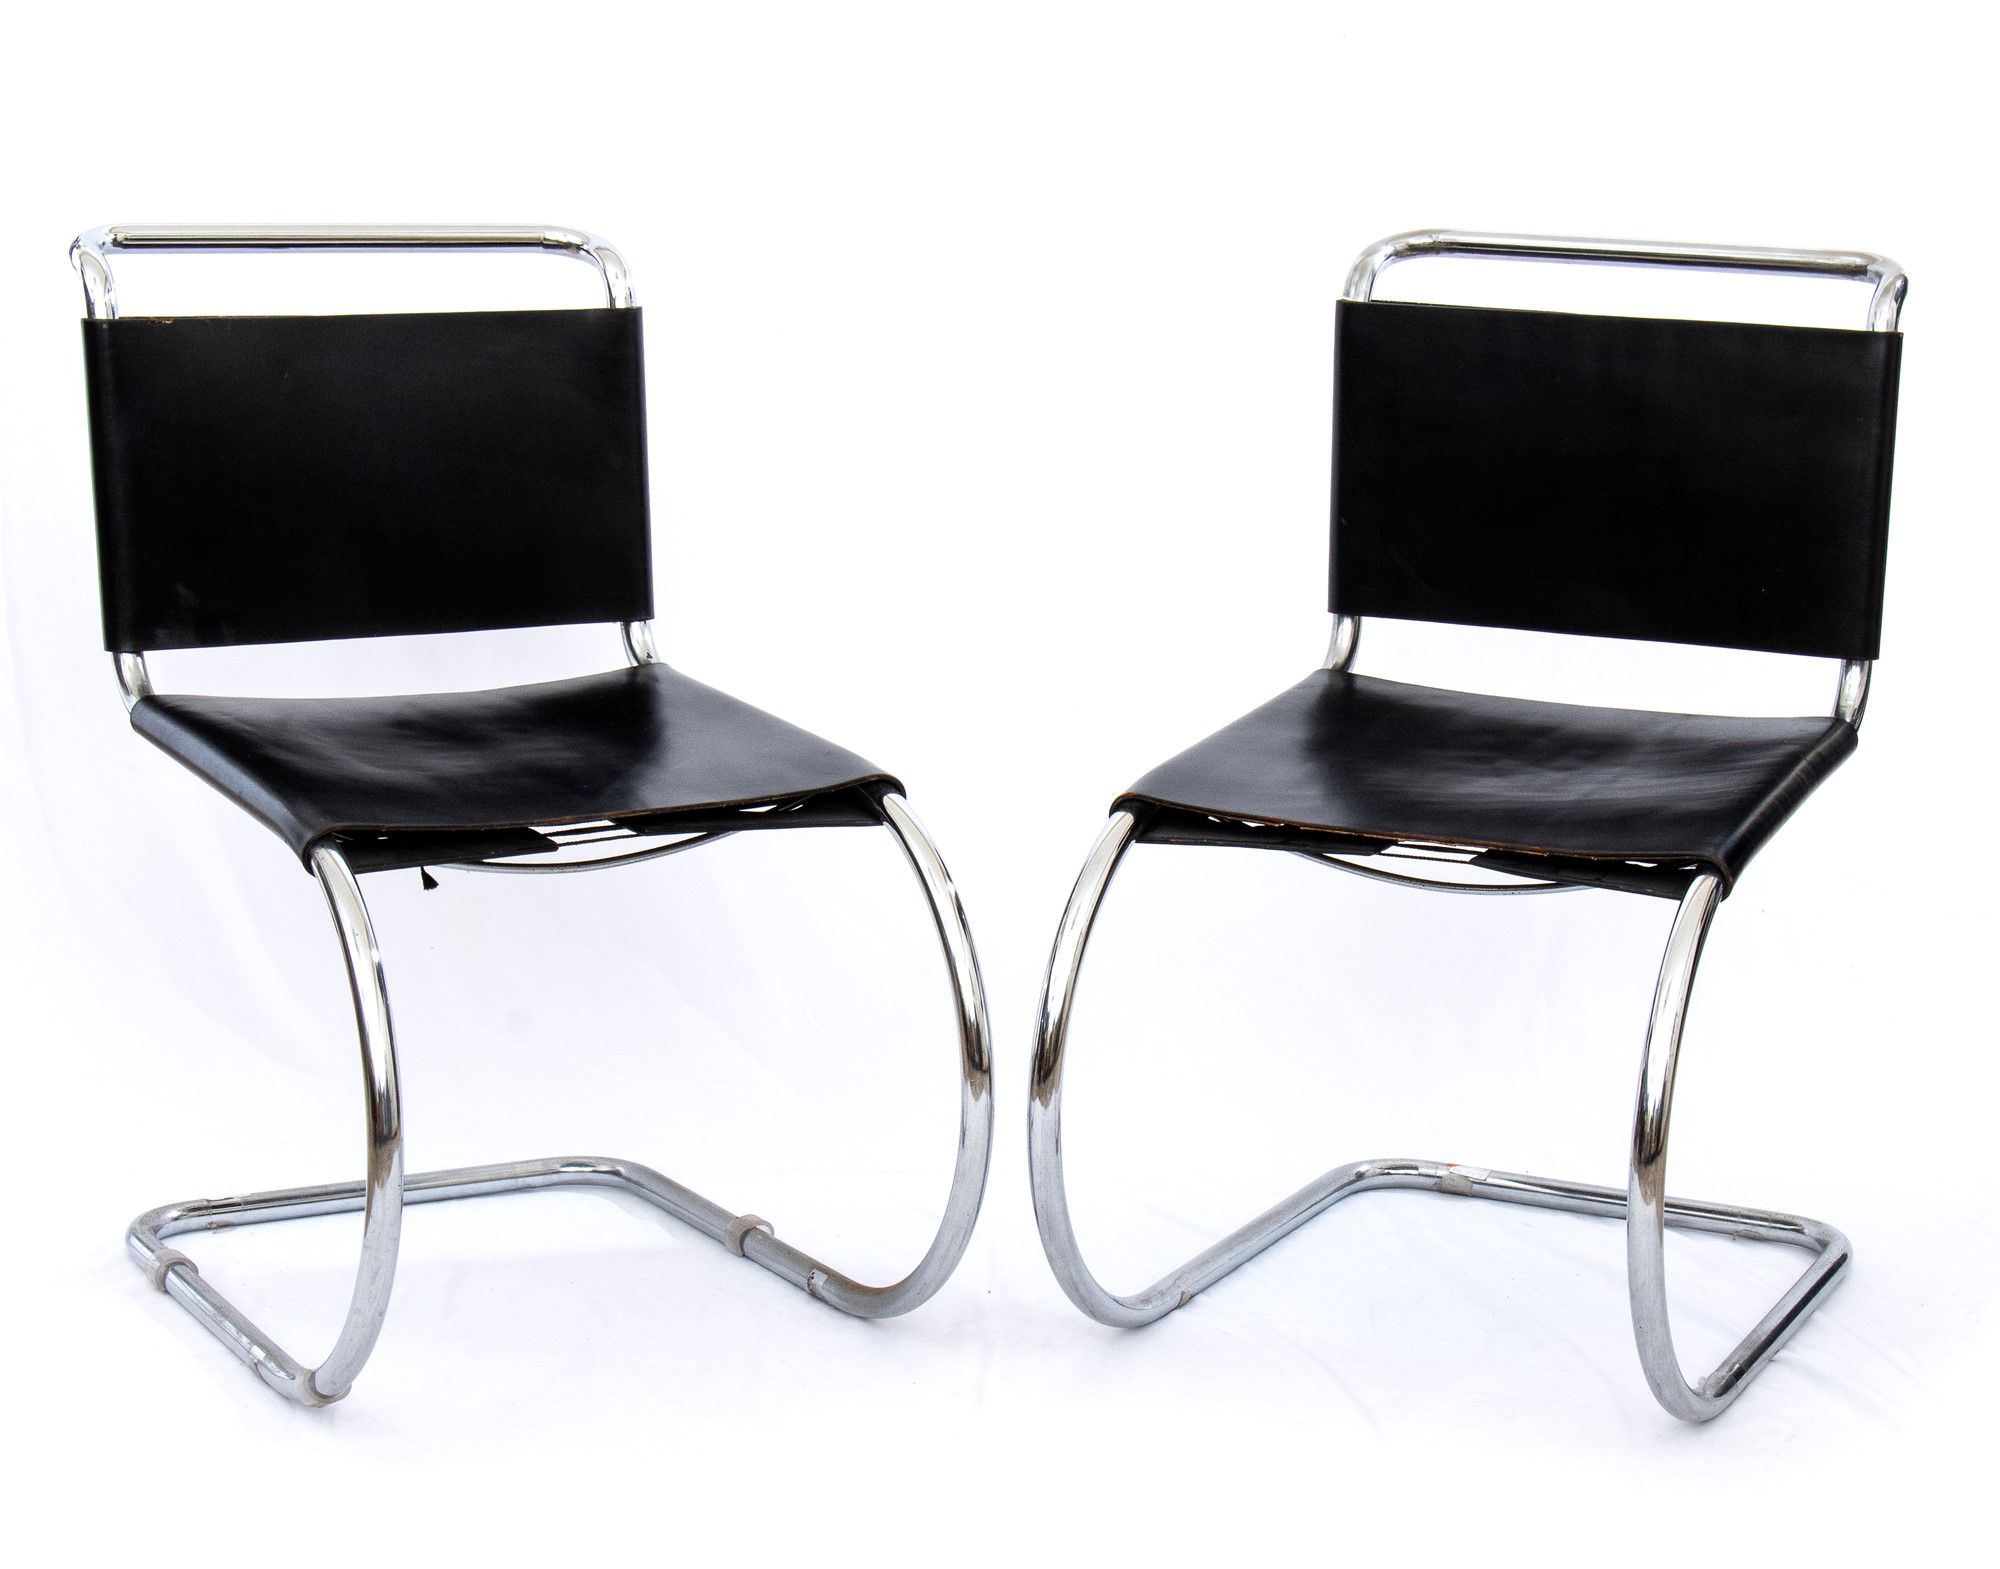 2 chairs in black leather and steel designed by Mart Stam and Marcer Beuer